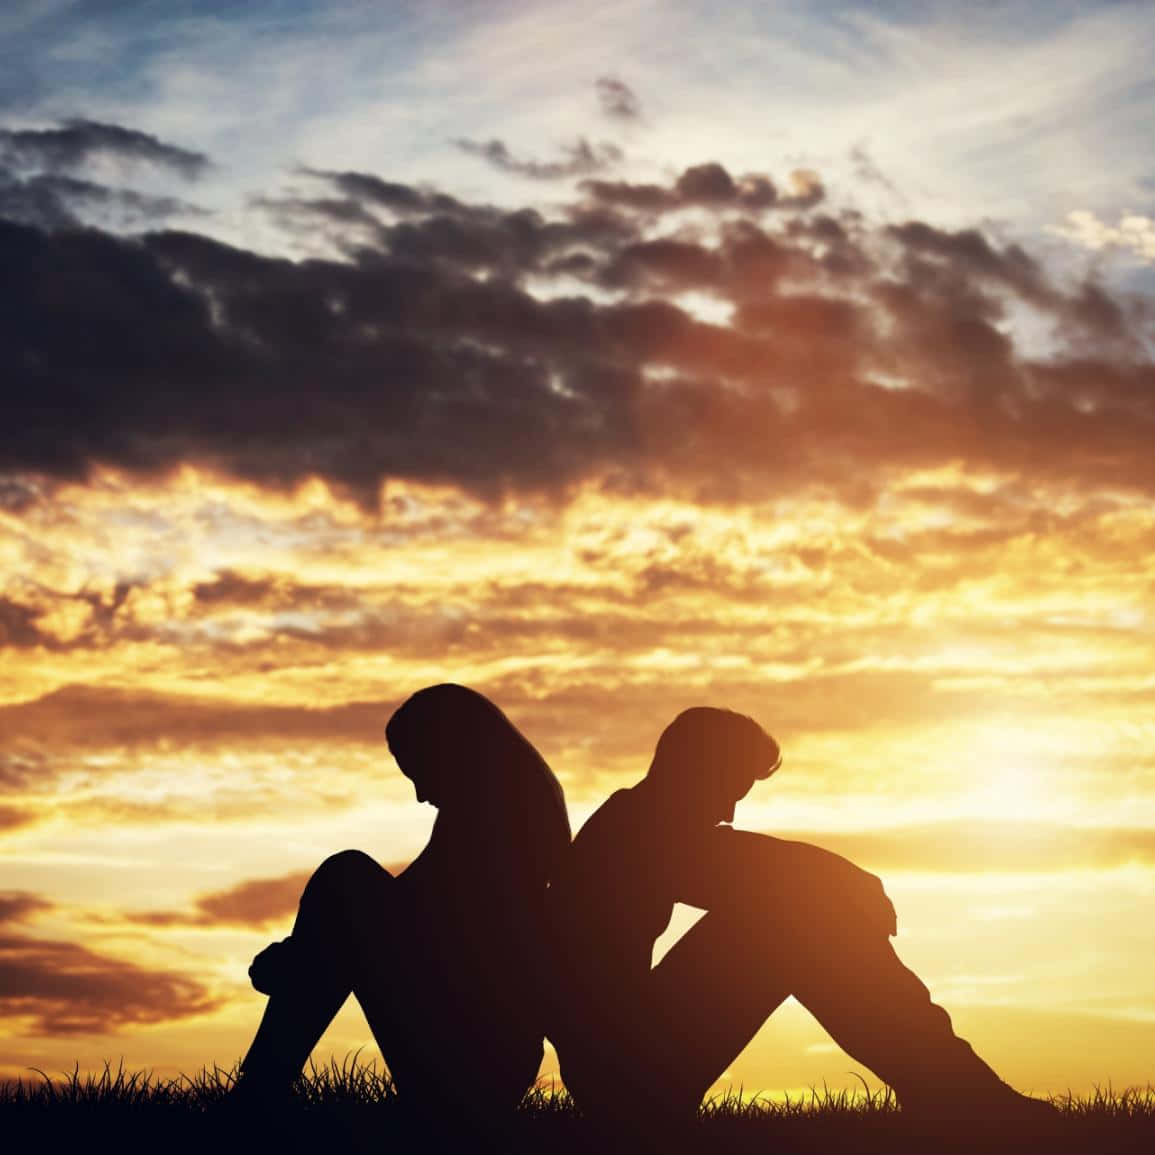 Two People Sitting On A Grassy Field At Sunset